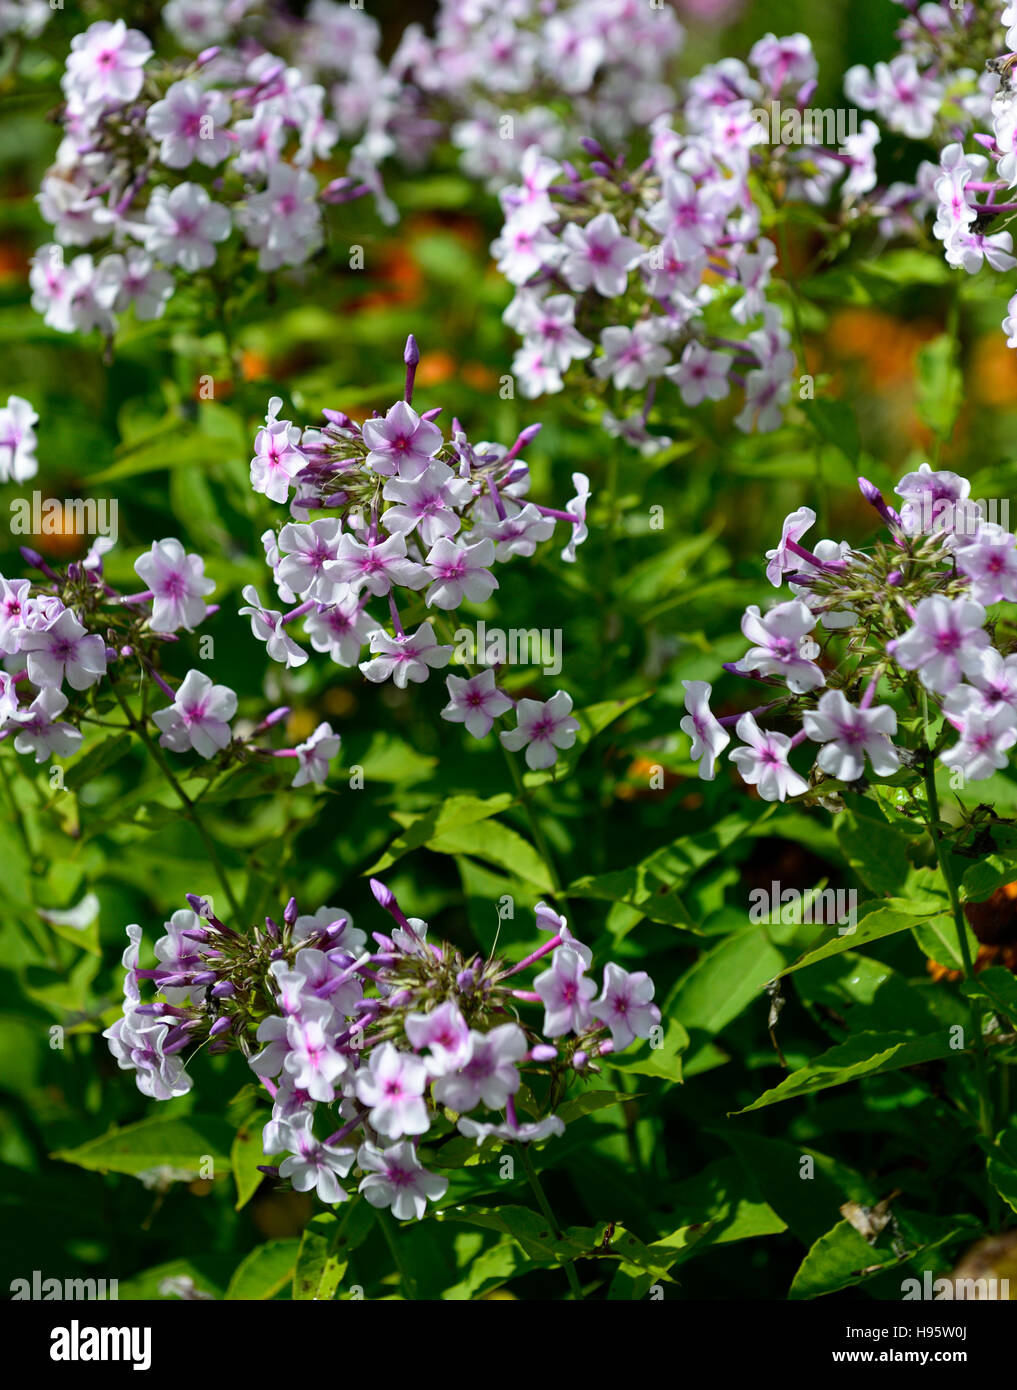 phlox paniculata white eye flame pink purple flower flowers flowering display displays garden late summer early autumn RM Floral Stock Photo